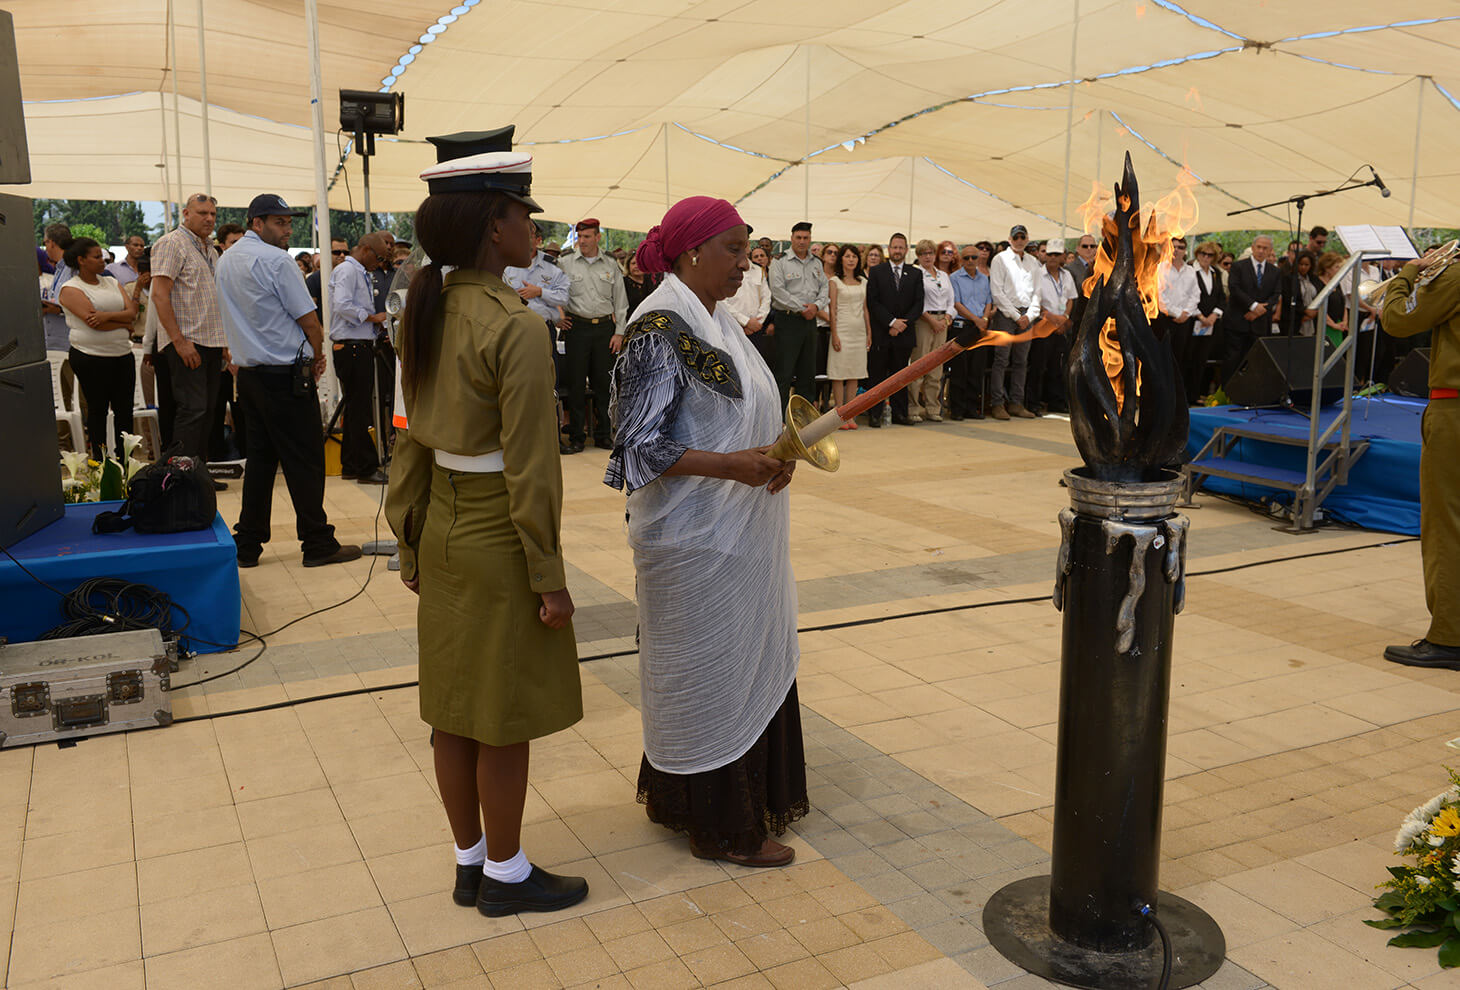 The National Memorial Service for Ethiopian Jews who perished while on their journey to Israel, A ceremony at Mount Herzl commemorating Ethiopian Jews who perished while on their journey to Israel. Photo: Mark Neyman, GPO